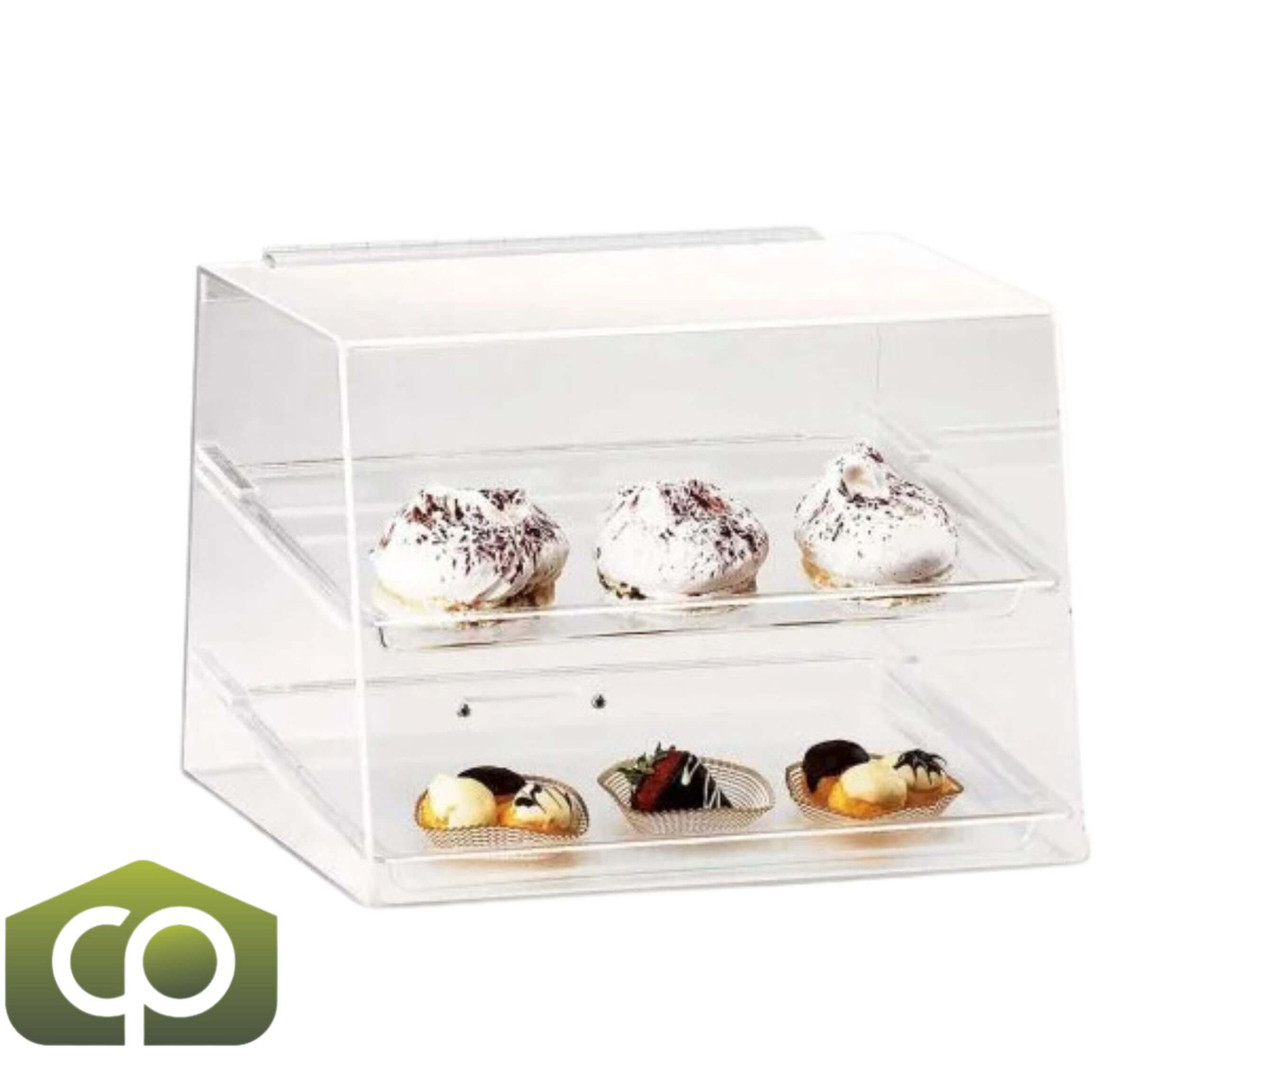 Cal-Mil Classic 15" x 13" x 11" Two Tier Acrylic Display Case with Rear Door-Chicken Pieces